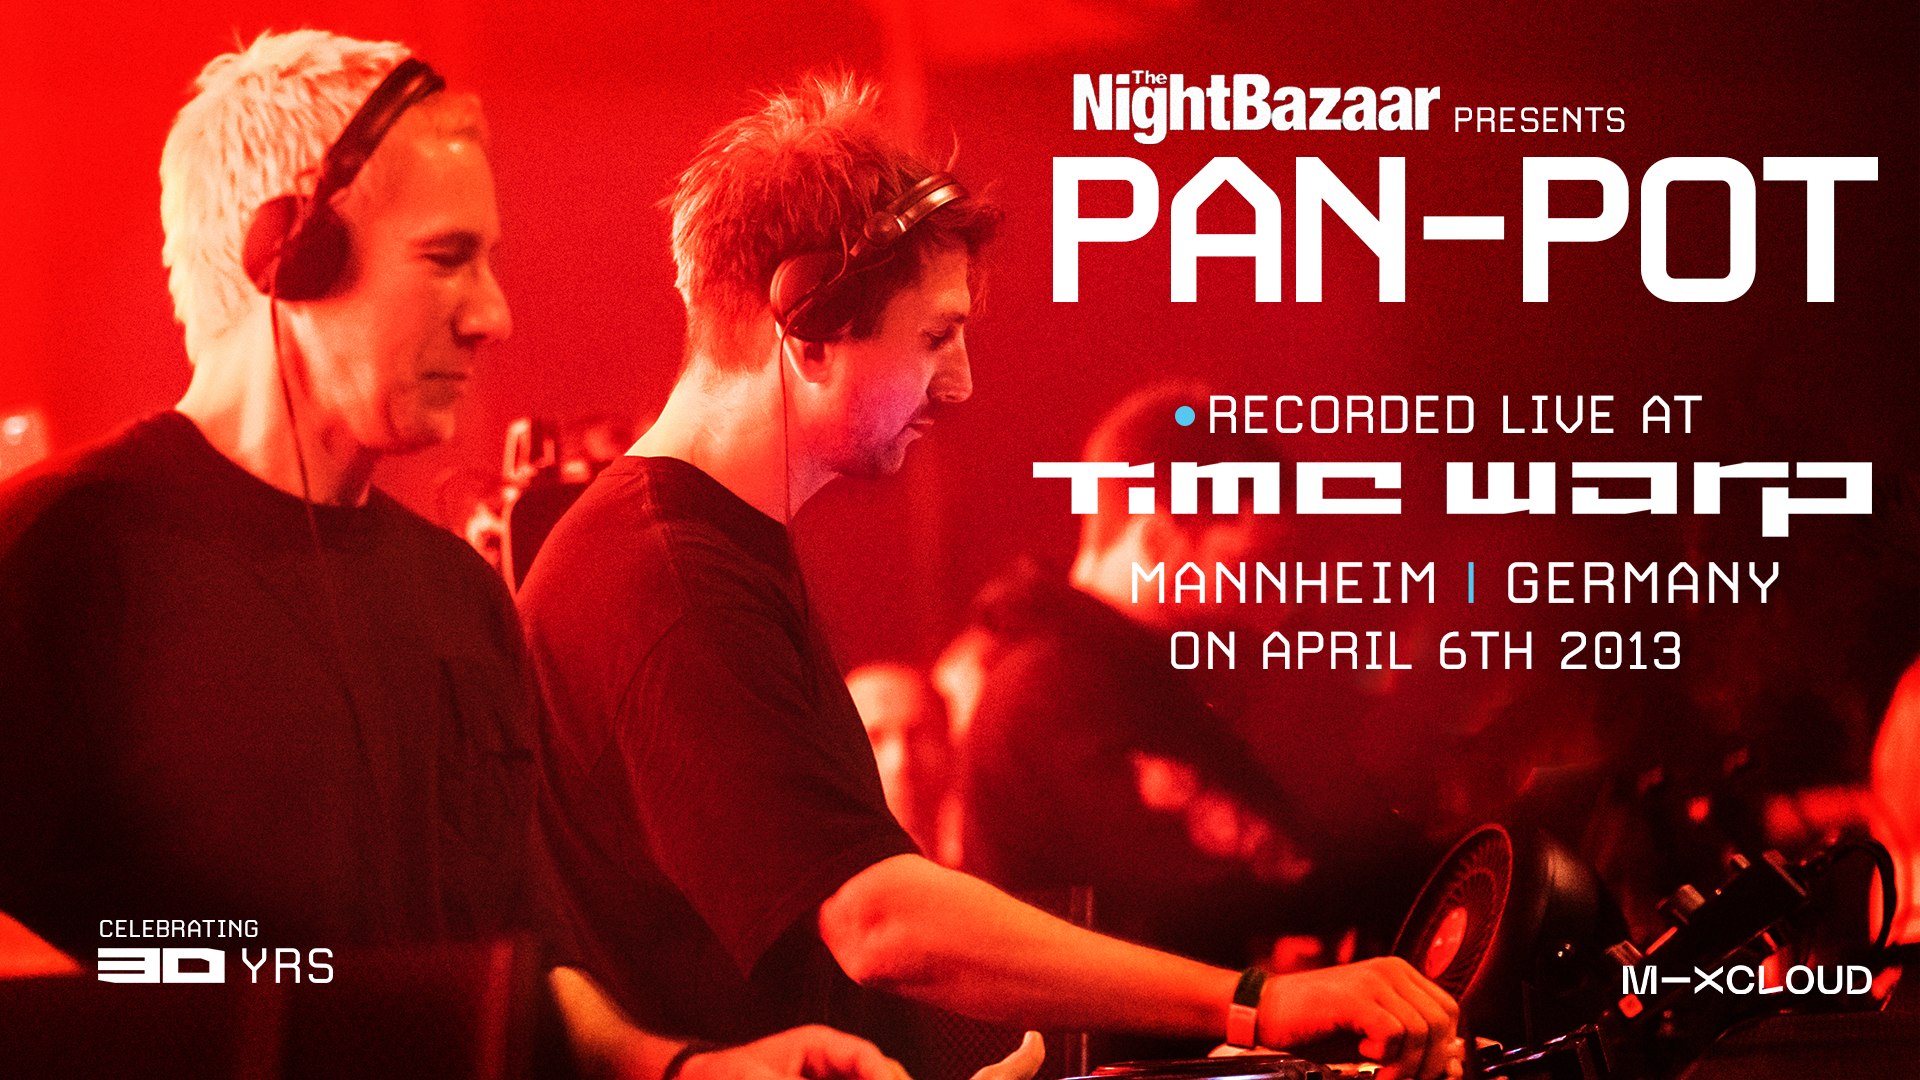 CLICK OR TAP IMAGE TO LISTEN TO PAN-POT'S SET RECORDED LIVE AT TIME WARP IN MANNHEIM, GERMANY ON APRIL 6TH 2013